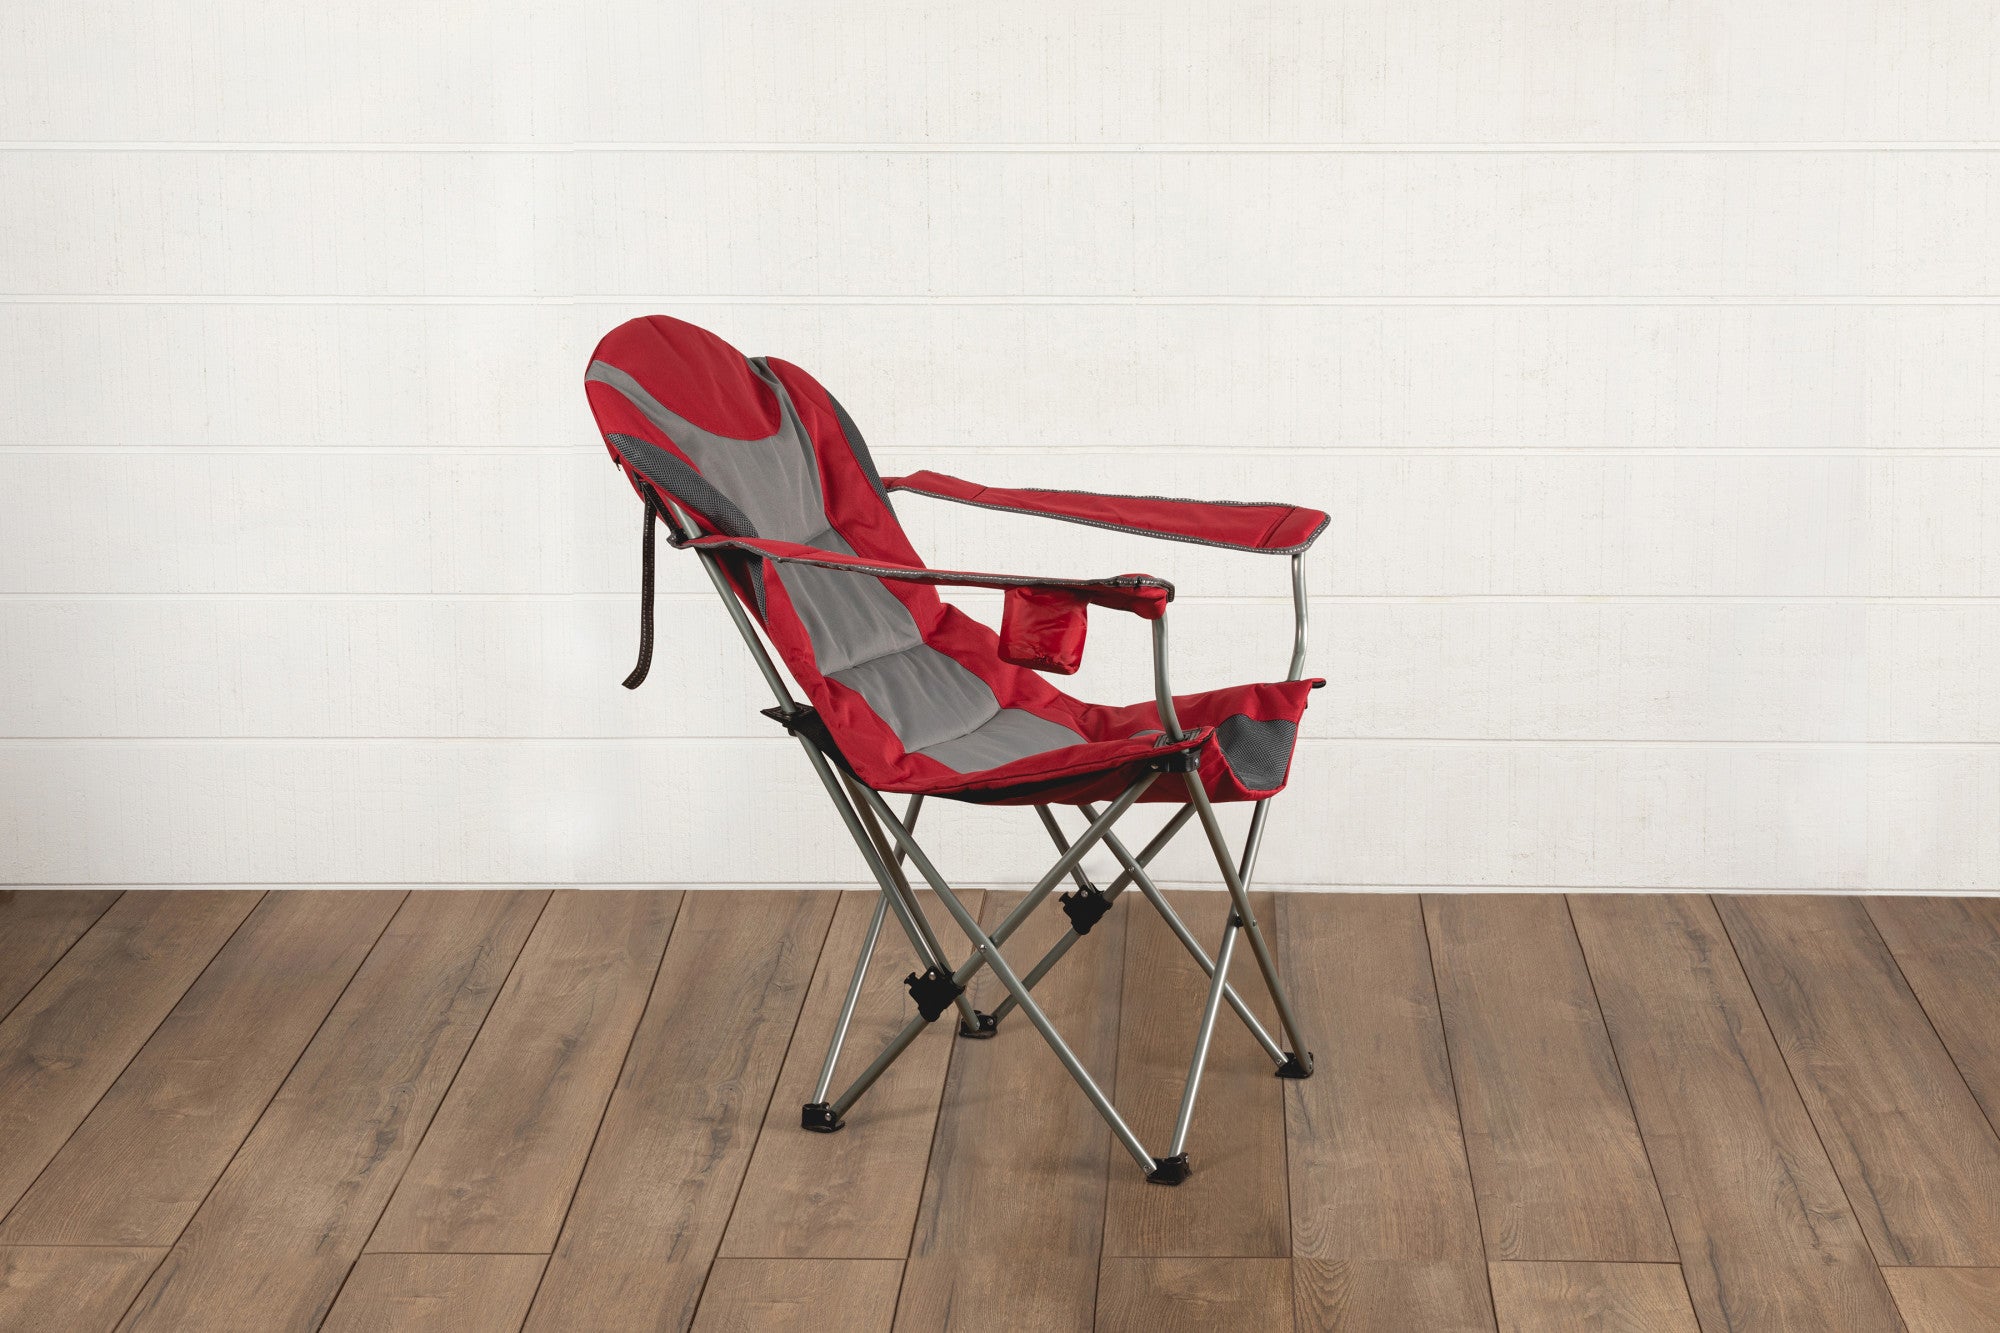 NC State Wolfpack - Reclining Camp Chair